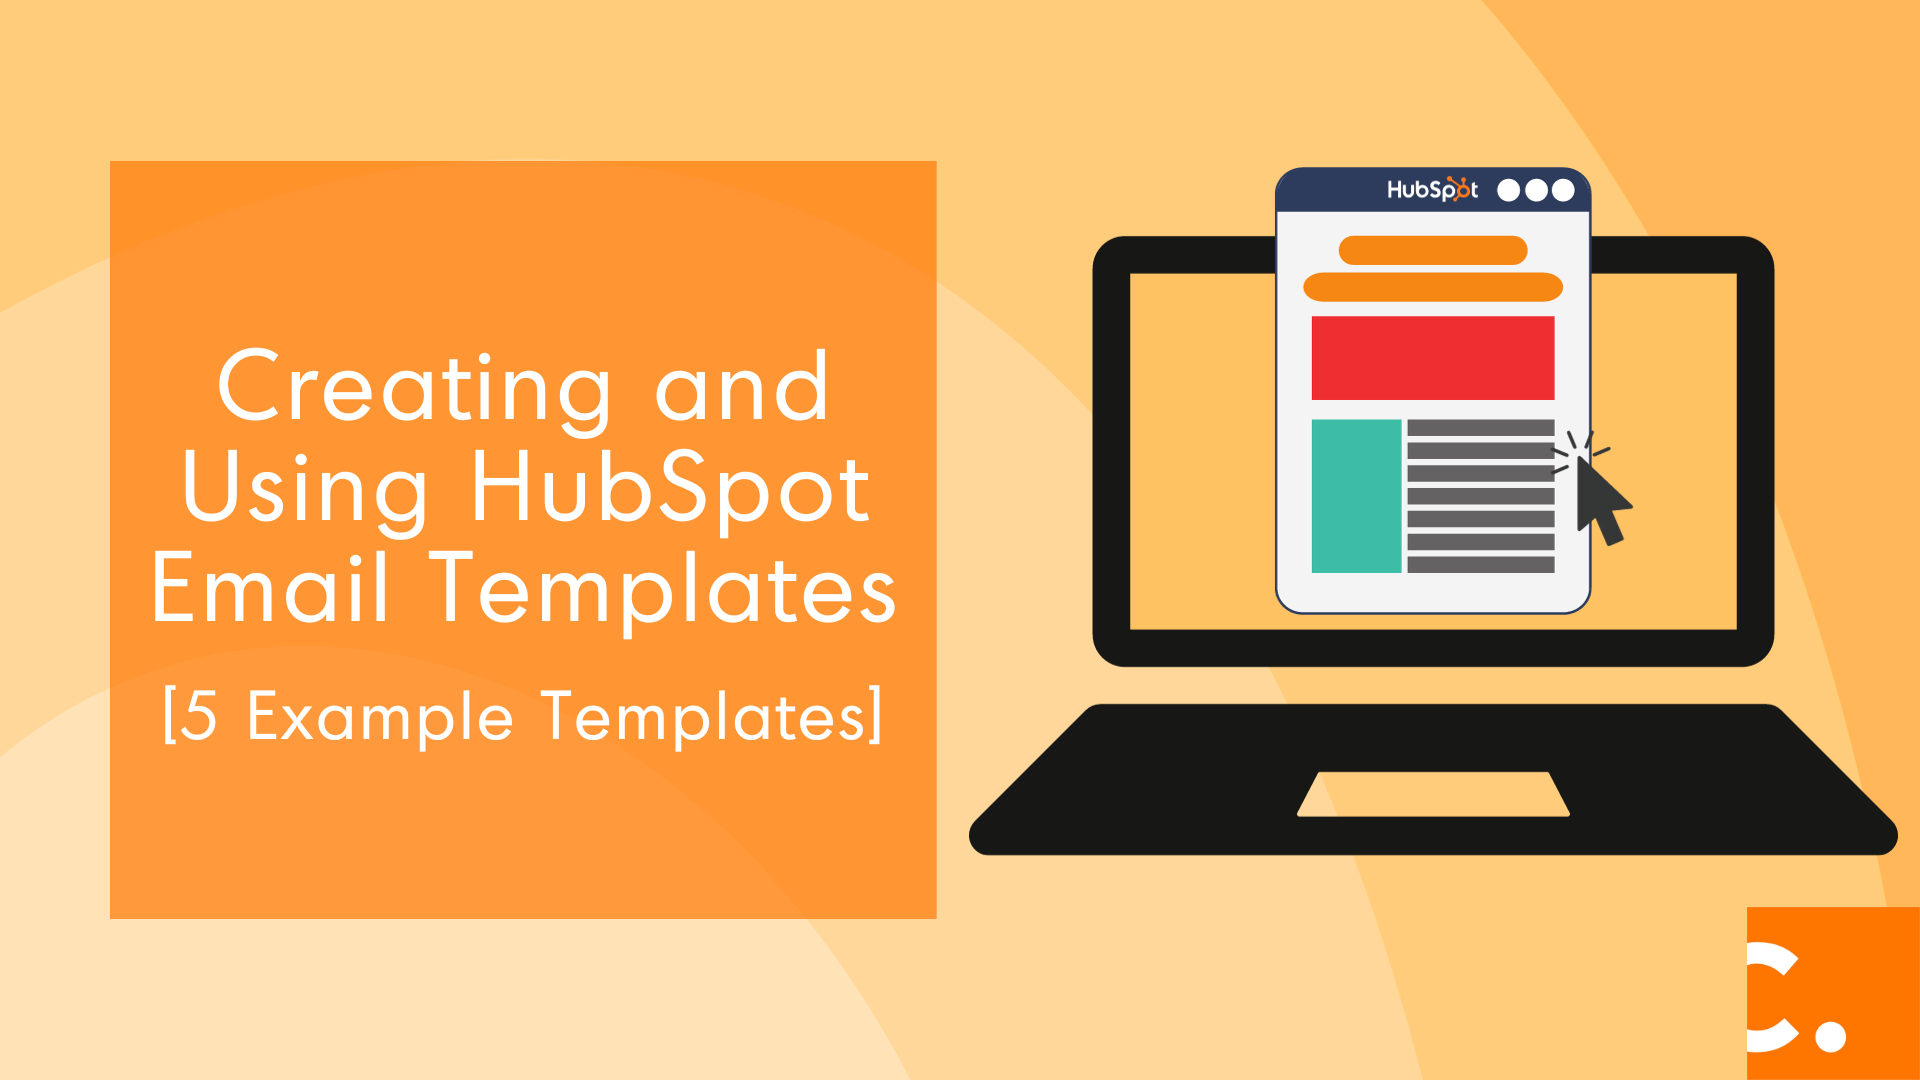 Creating and Using HubSpot Email Templates [5 Example Templates]